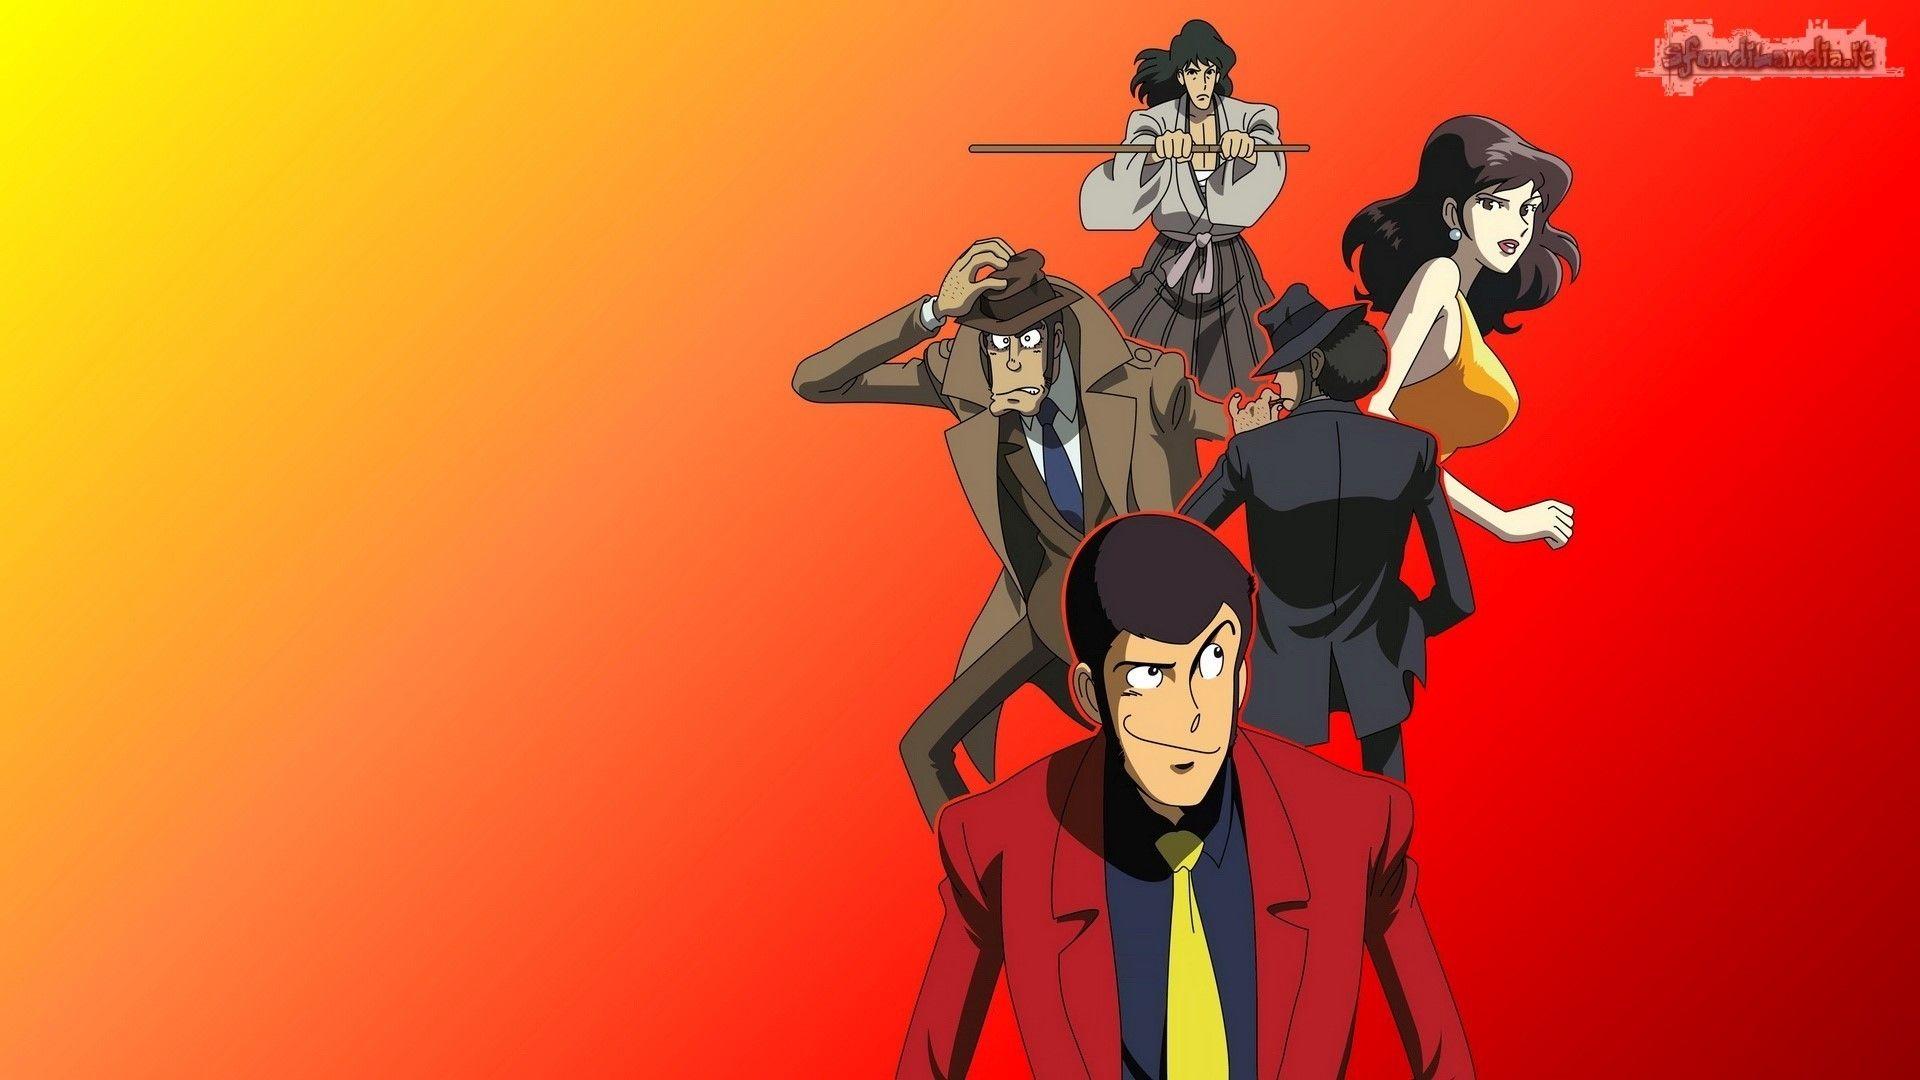 Download Aesthetic Lupin The Third Wallpaper  Wallpaperscom